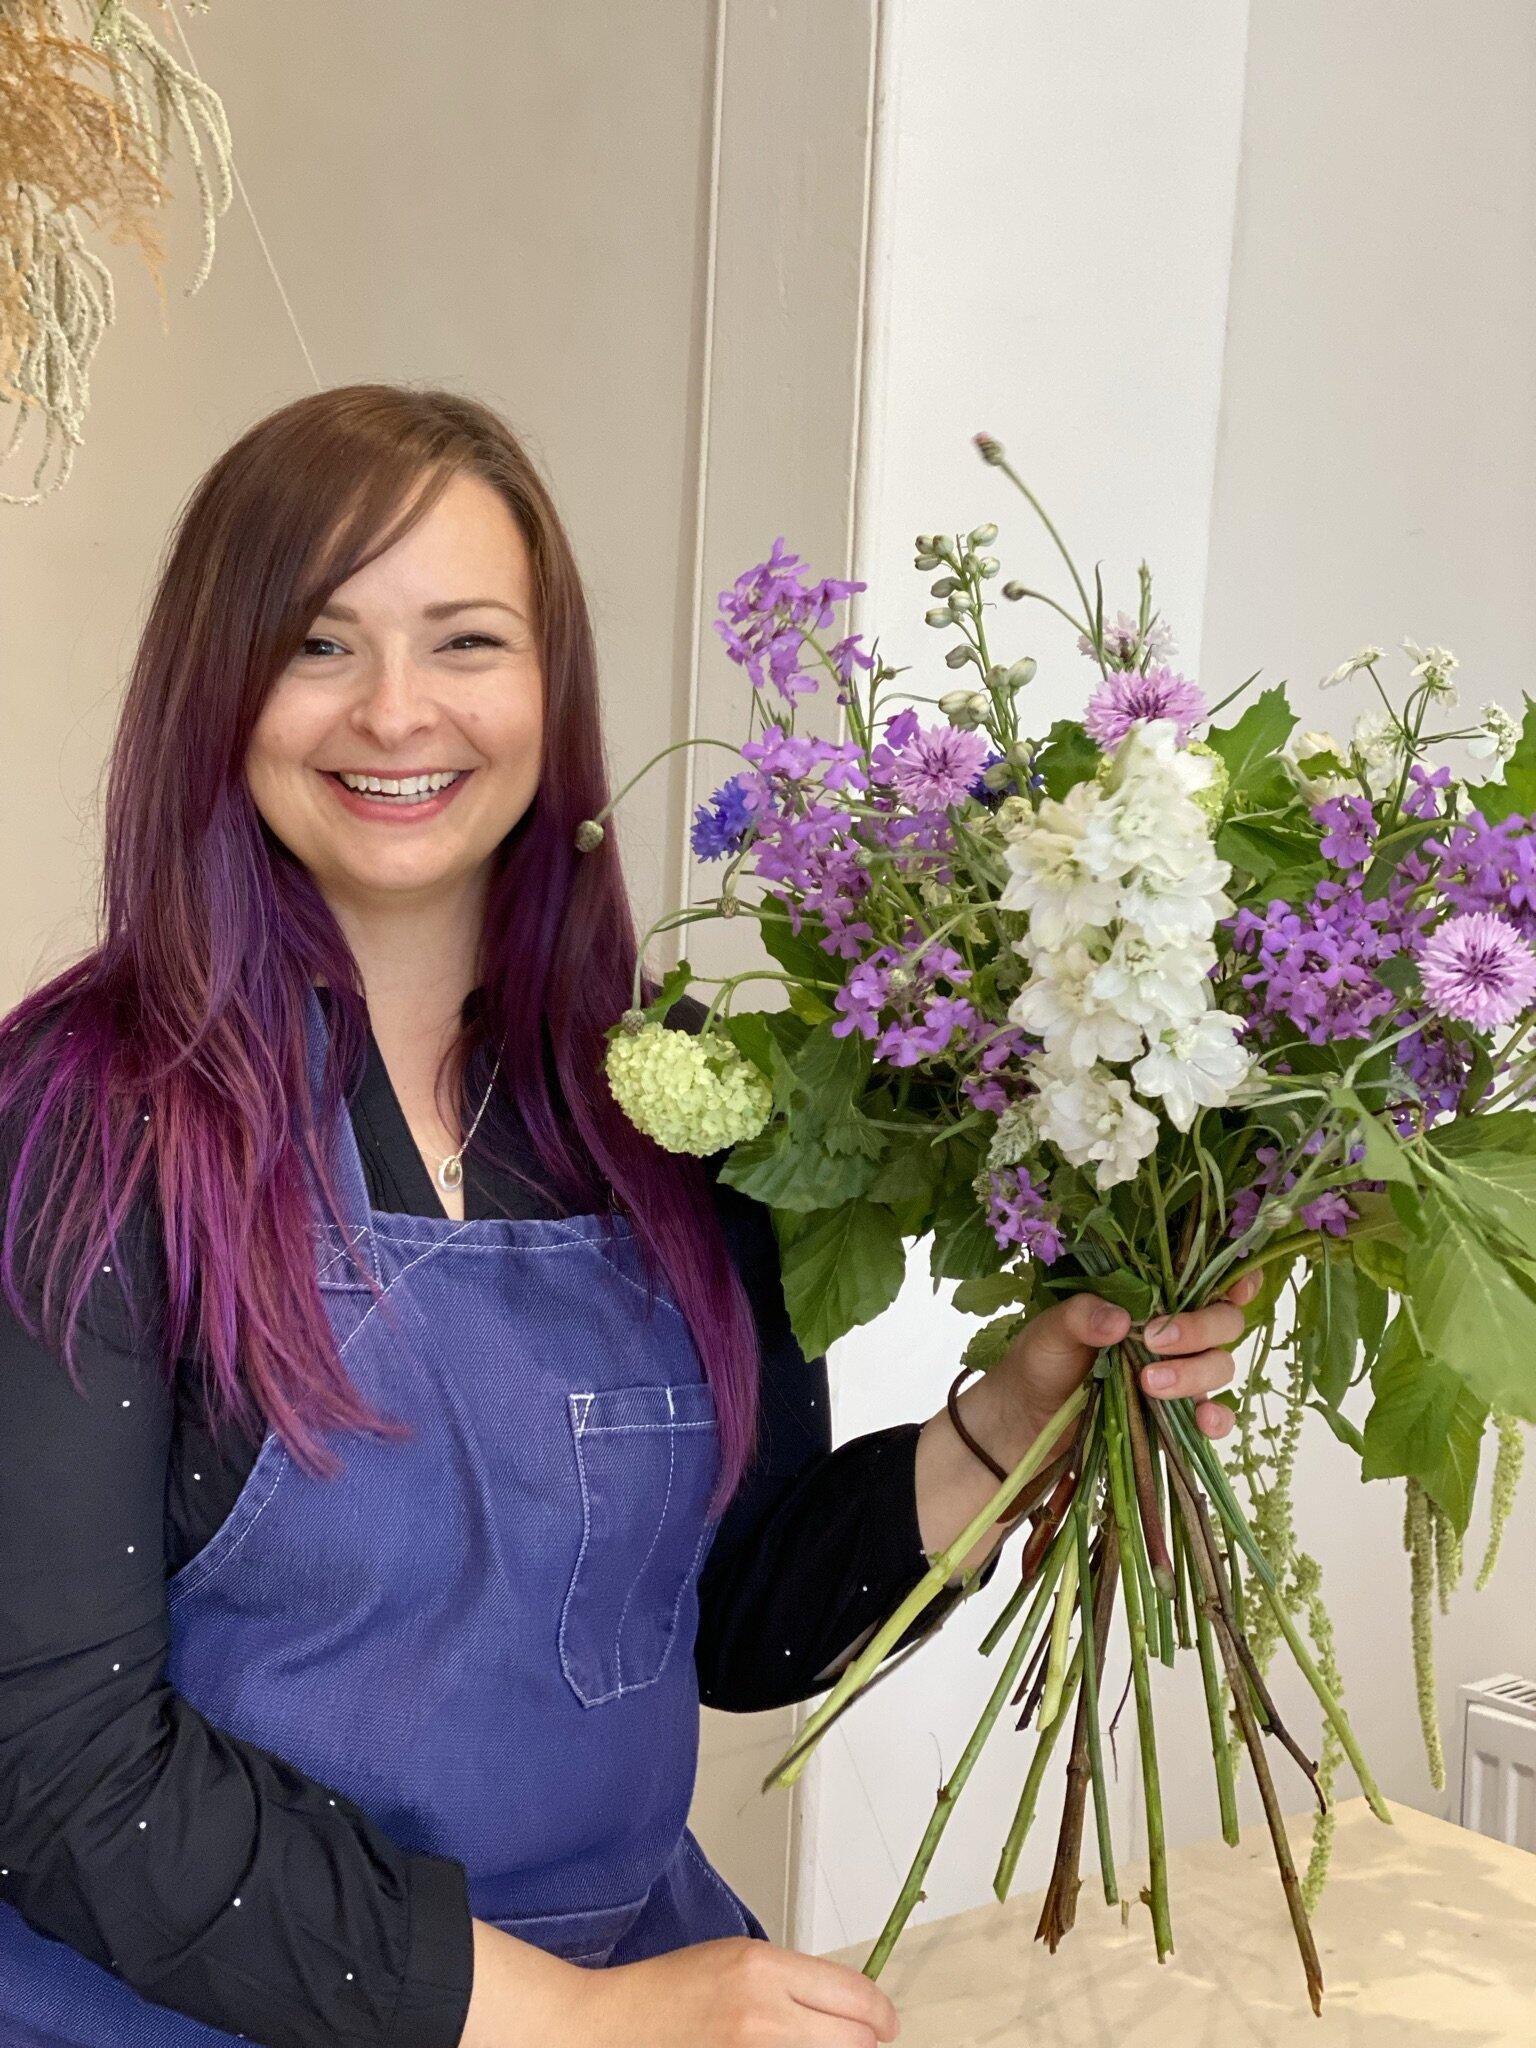 Student look happy, holding a seasonal summers bouquet of flowers made at The Bath Flower School 